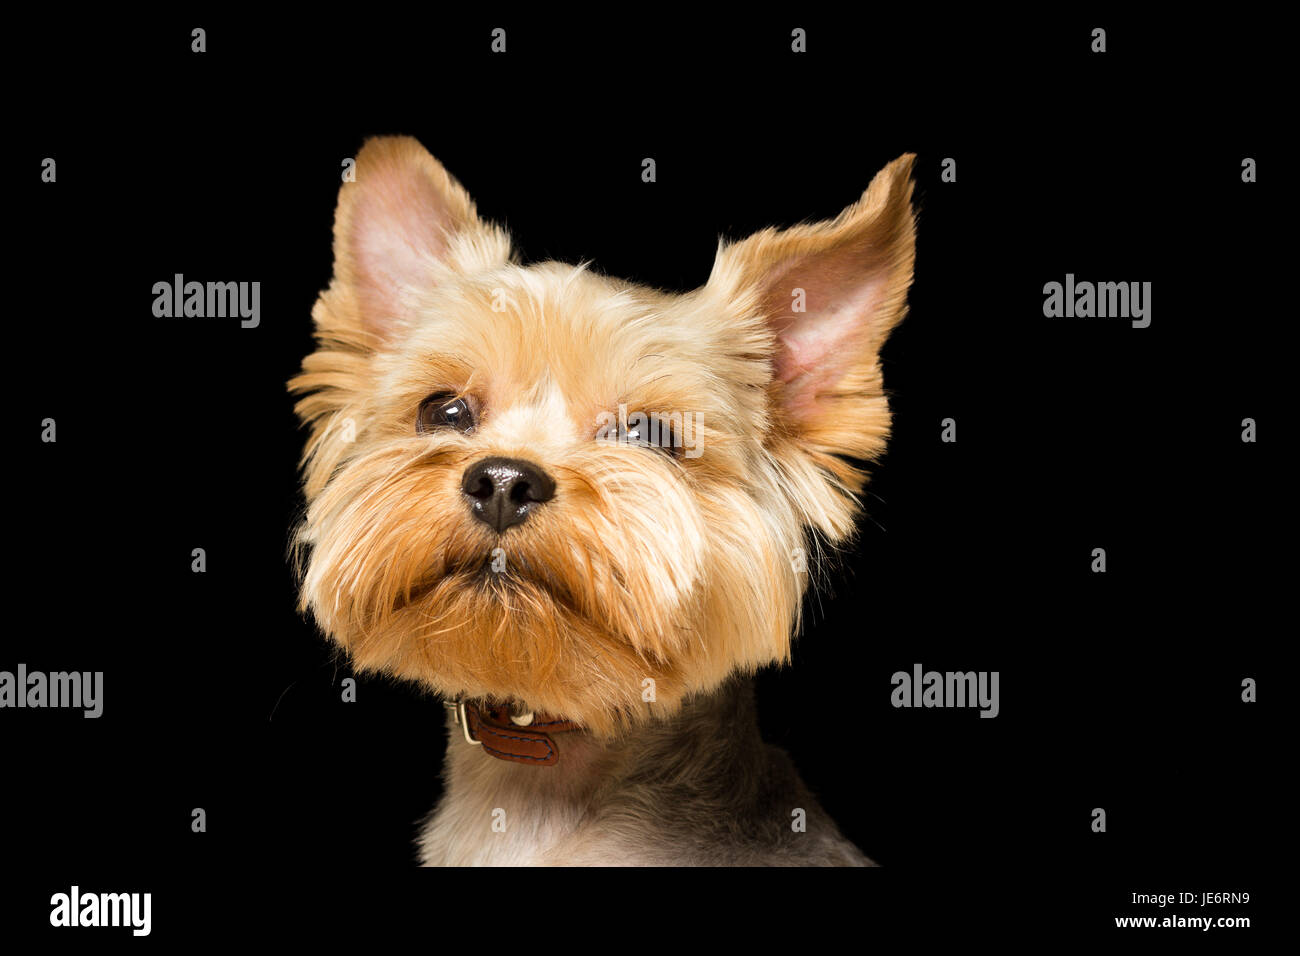 Yorkshire Terrier Haircut Stock Photos Yorkshire Terrier